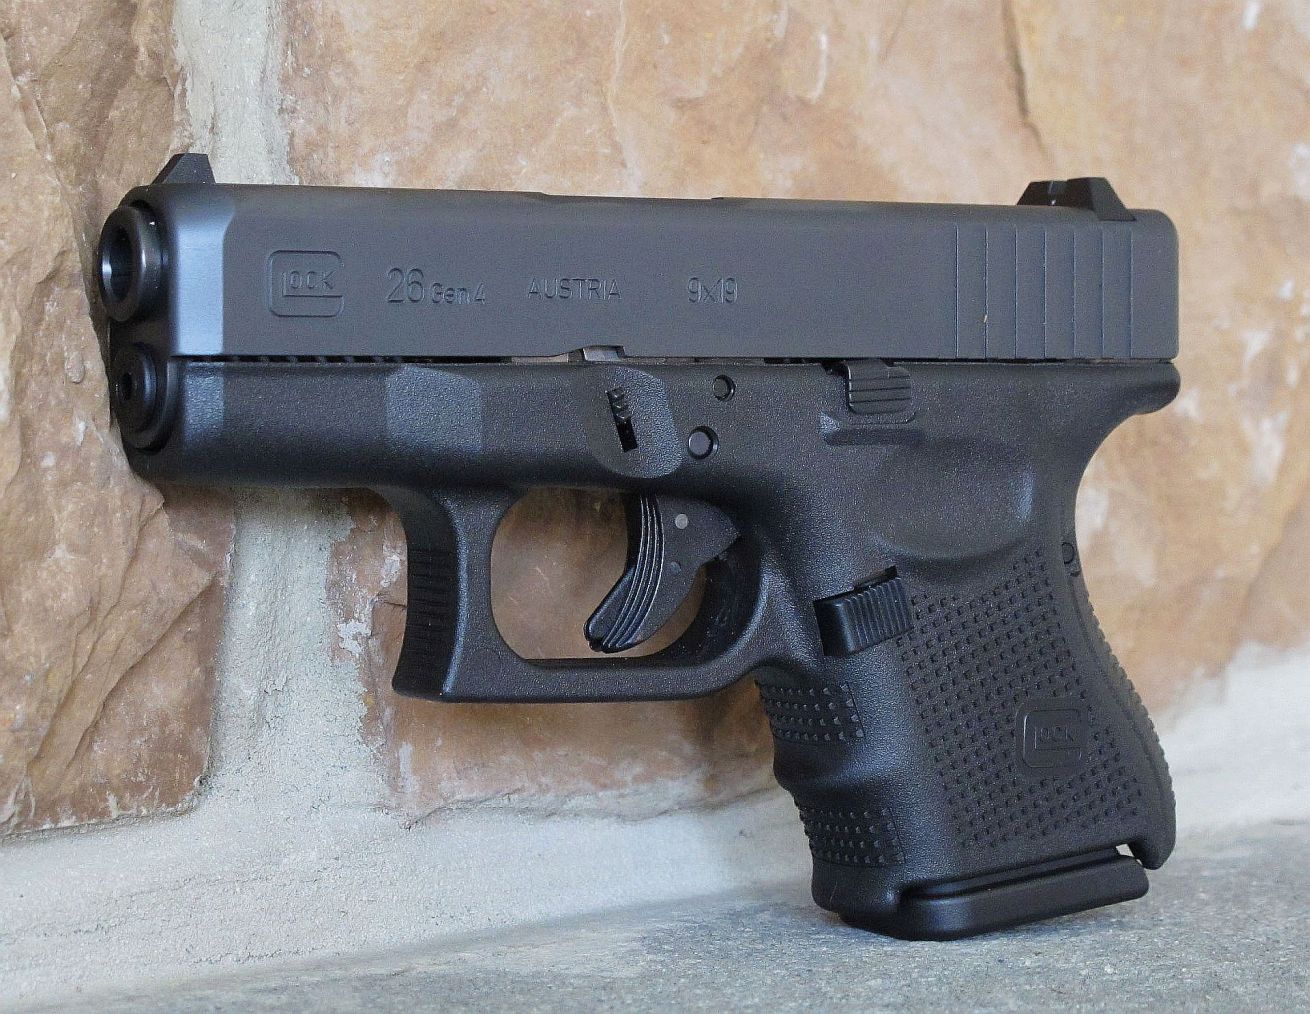 Location Central Pa Posts Glock Armorer Yes Glocks Owned G19 G21g4